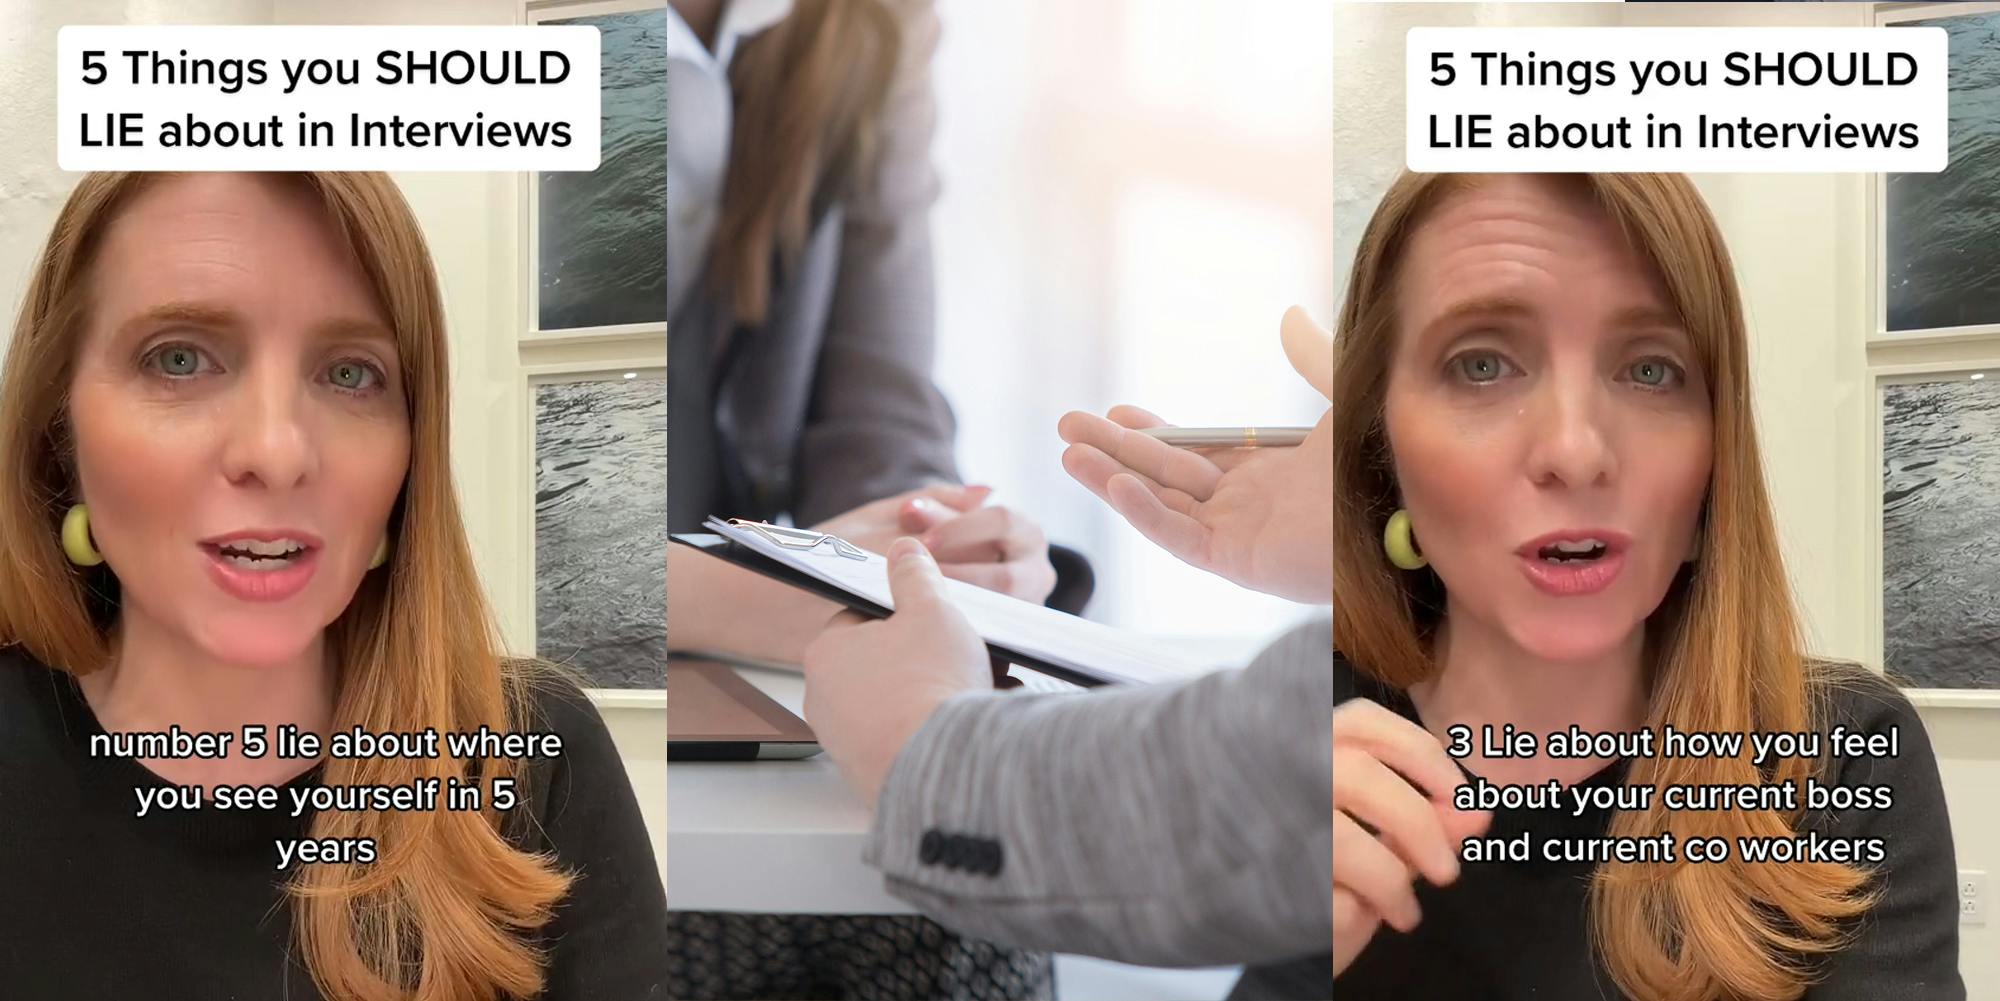 woman speaking with caption "5 Things you SHOULD LIE about in Interviews" "number 5 lie about where you see yourself in 5 years" (l) woman at intervie (c) woman speaking with caption "5 Things you SHOULD LIE about in Interviews" "3 lie about how you feel about your current boss and current co workers" (r)